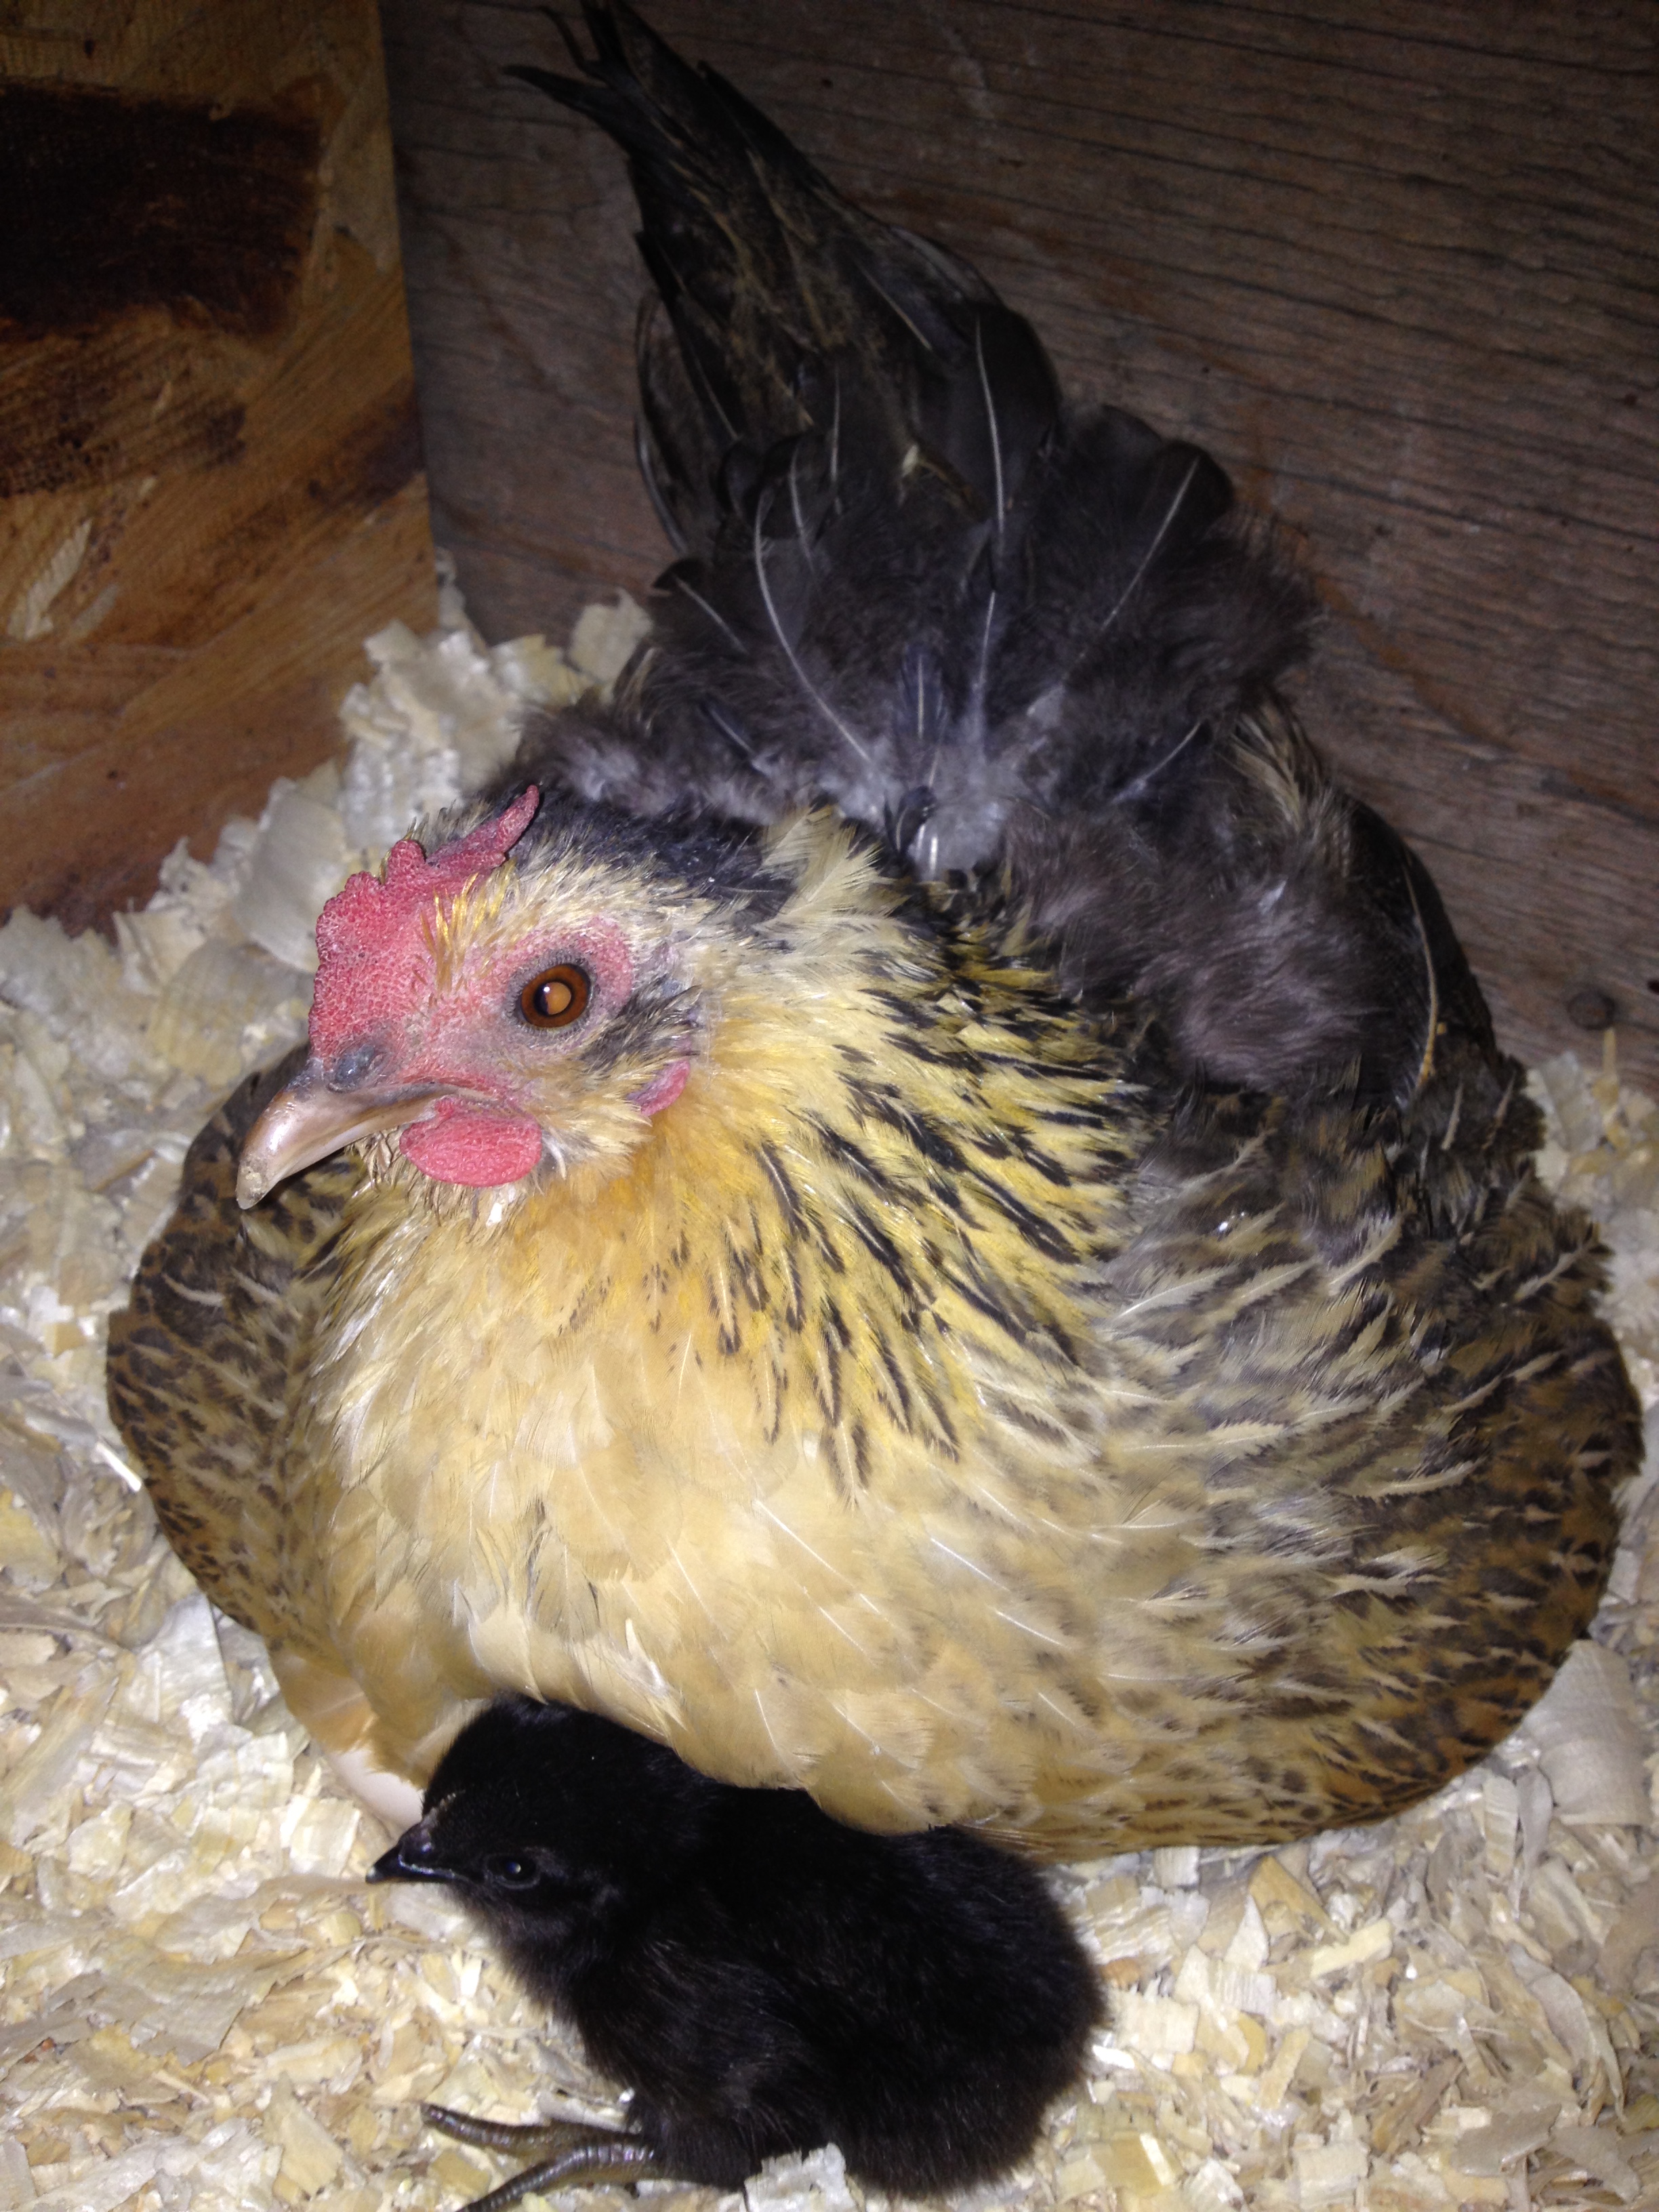 Our little bantam named Golden Girl went broody a few weeks ago and yesterday her first baby was born!